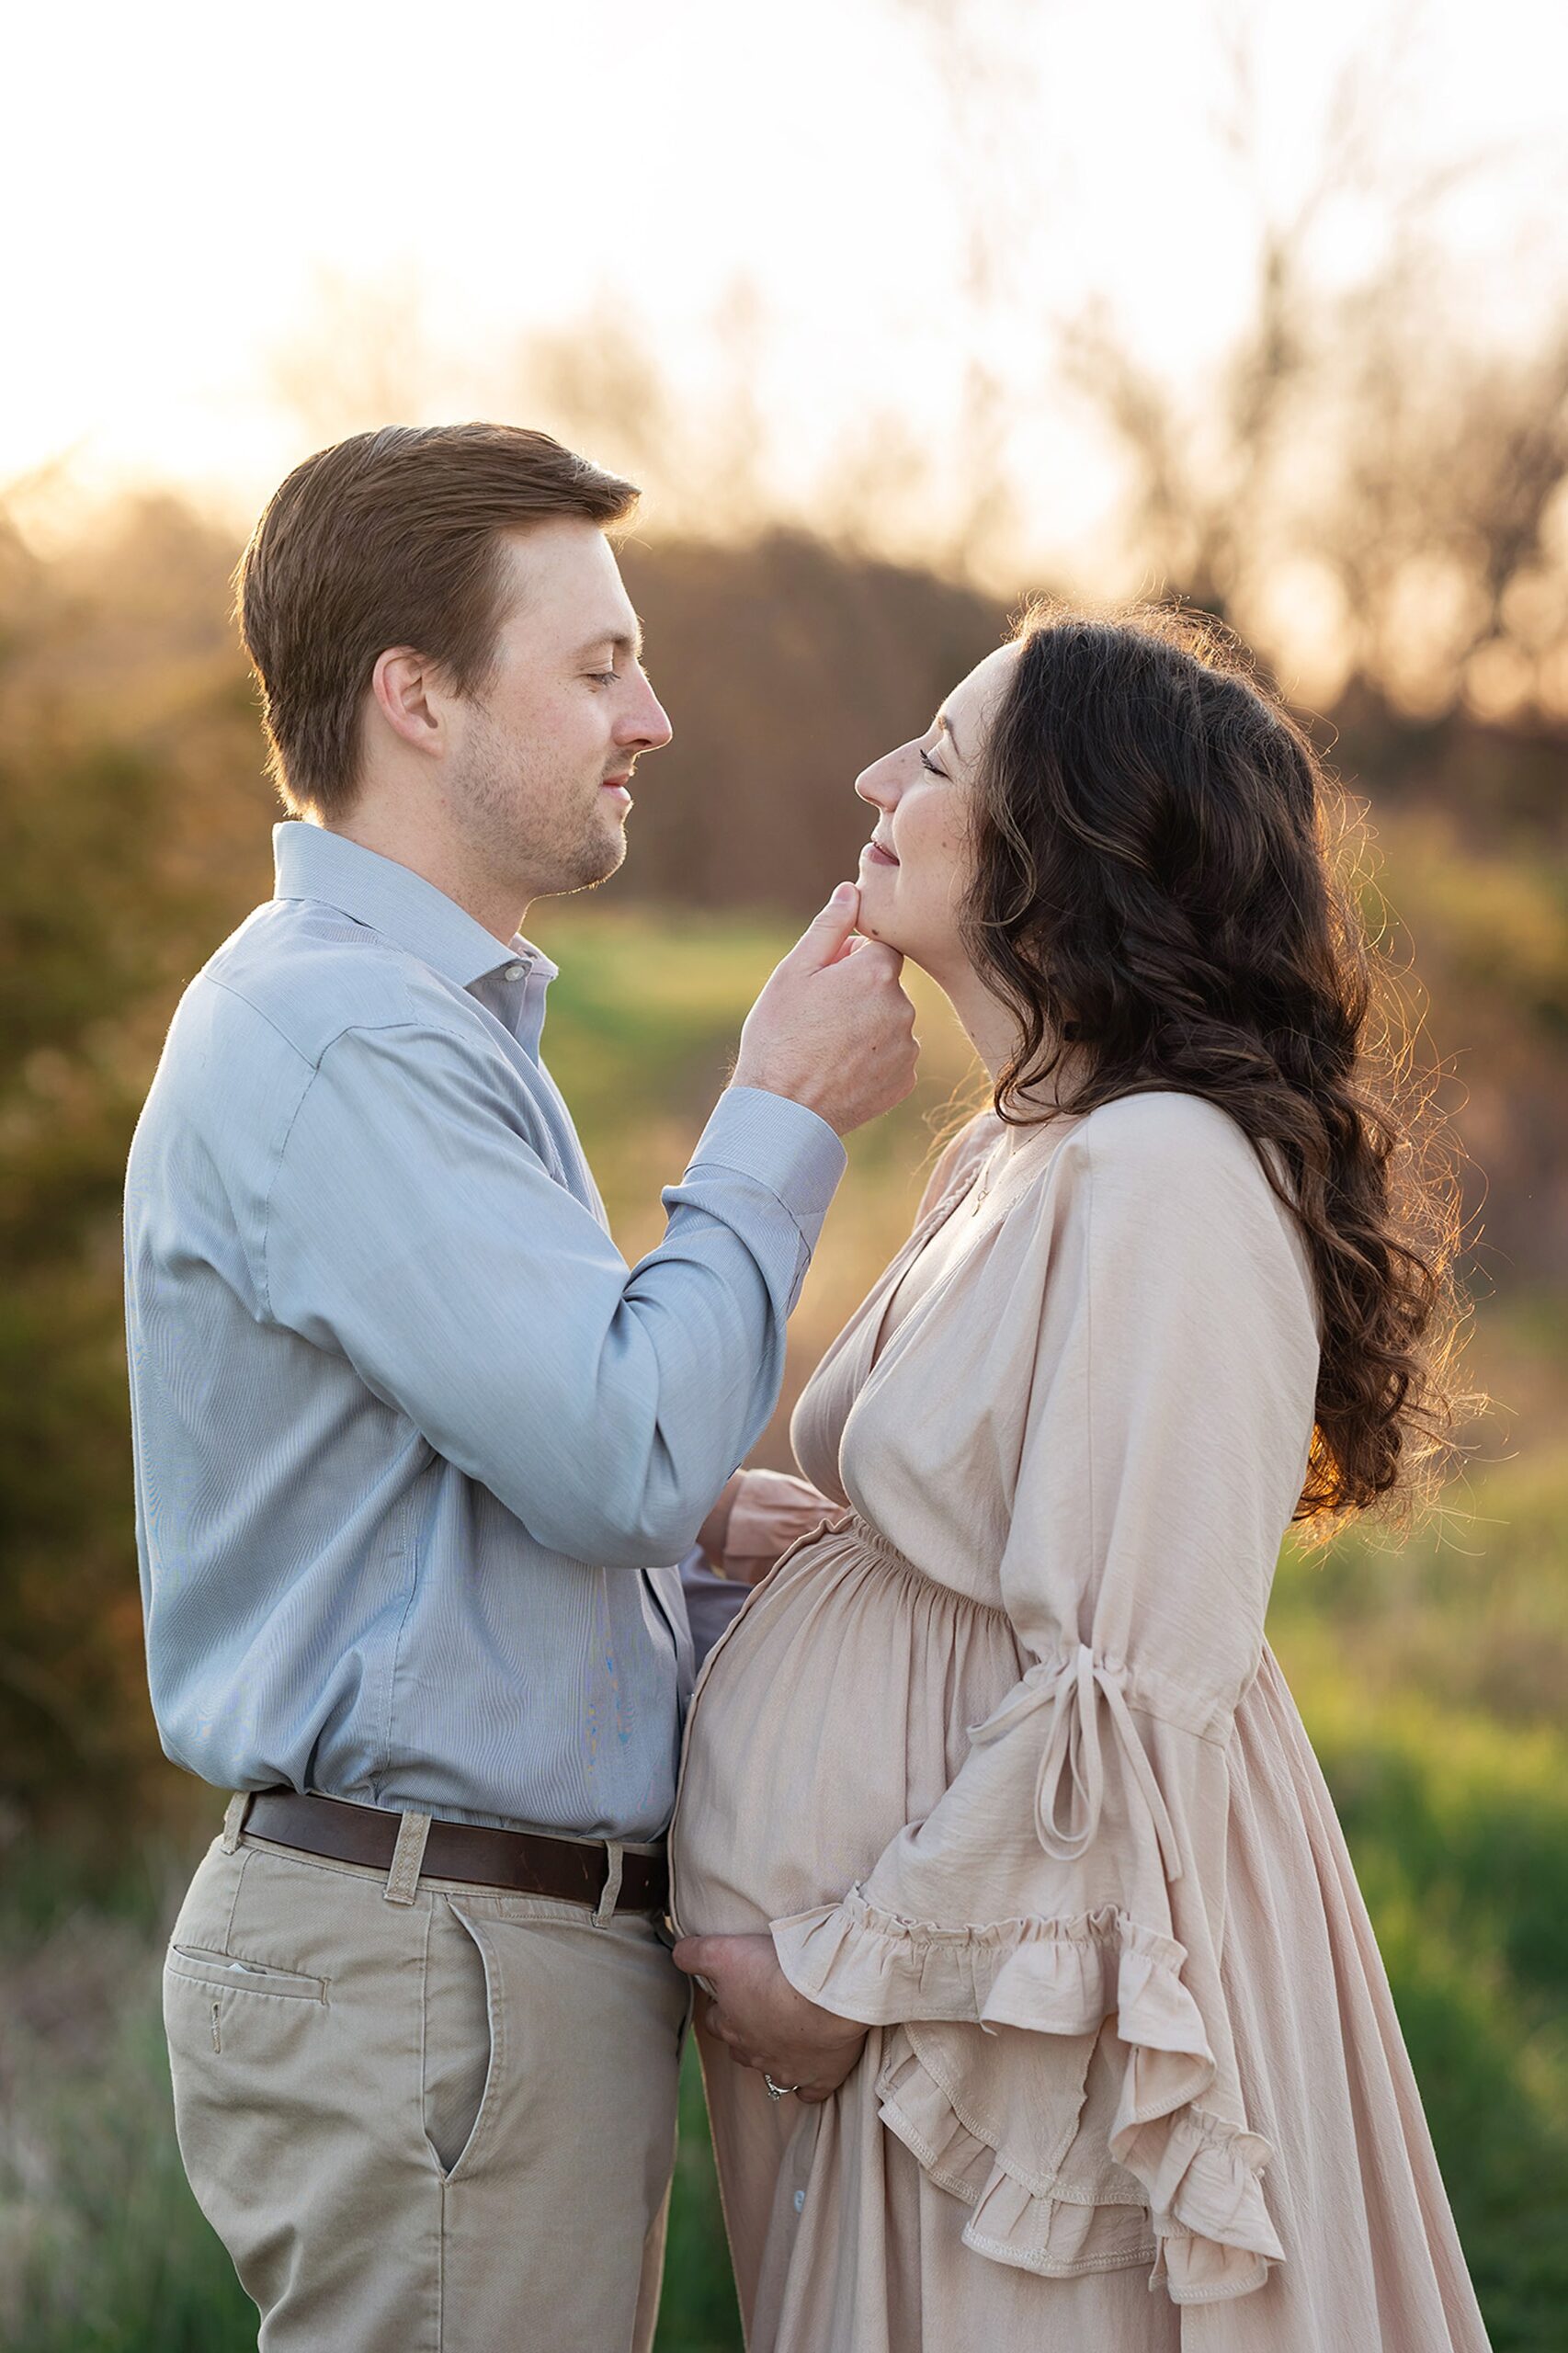 A happy father to be holds his pregnant wife's chin while standing in a park at sunset